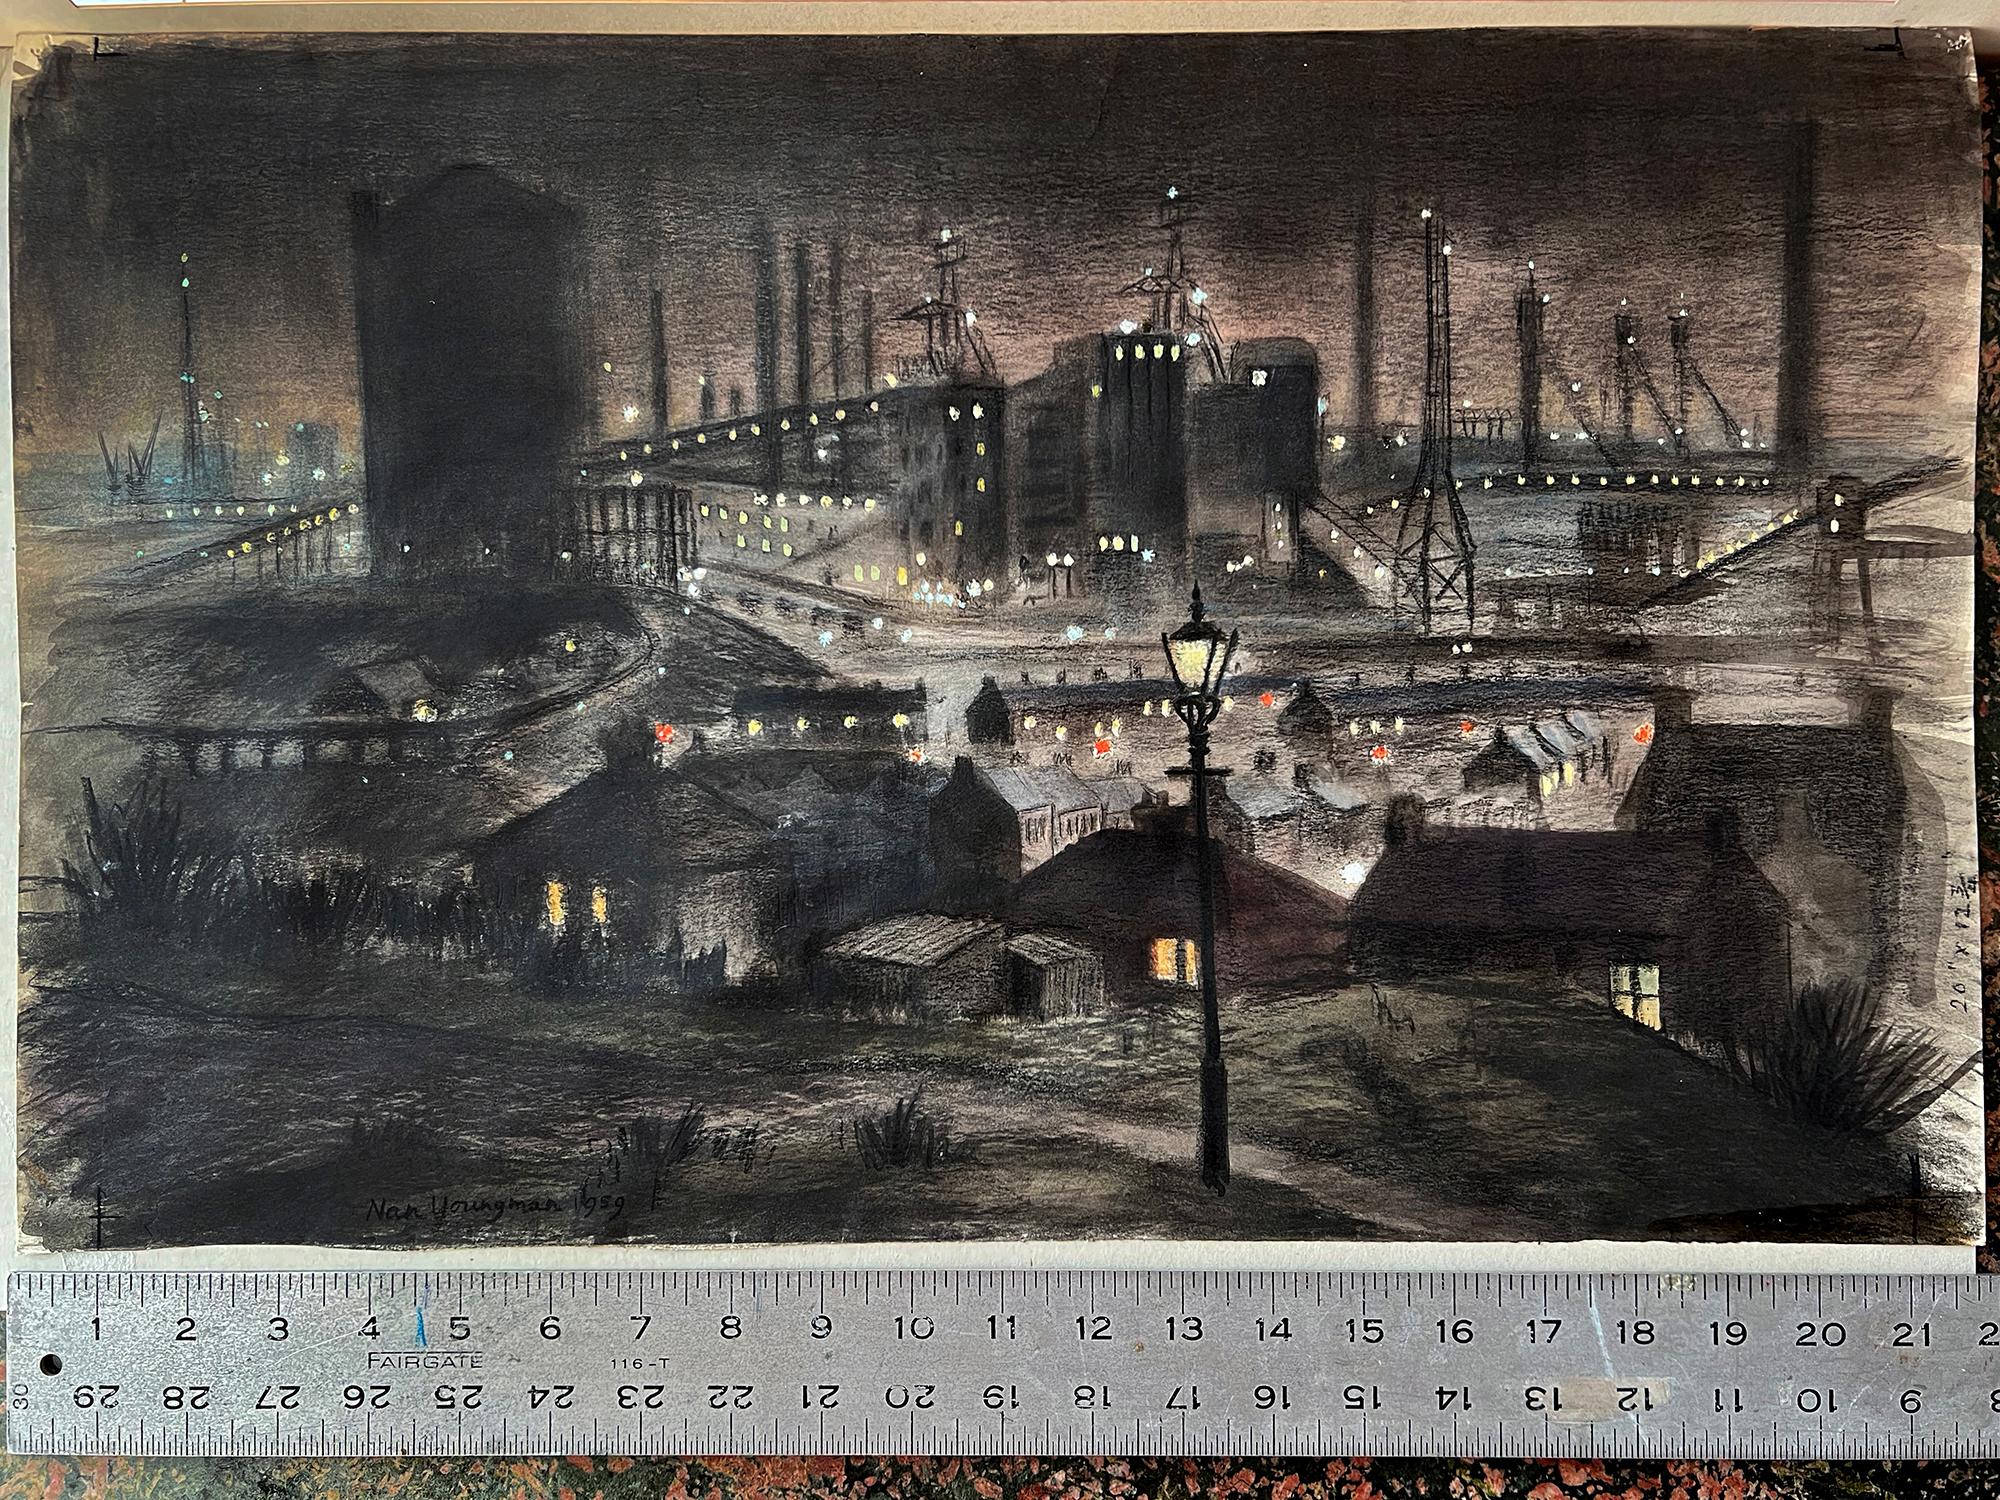 A moody night scene of Great Britain's largest and polluted steel plant in Port Talbot, Wales.  L. S. Lowry is the best known artist of Britain's industrial scenes of the 20th century but there were others which include this somber work by  female